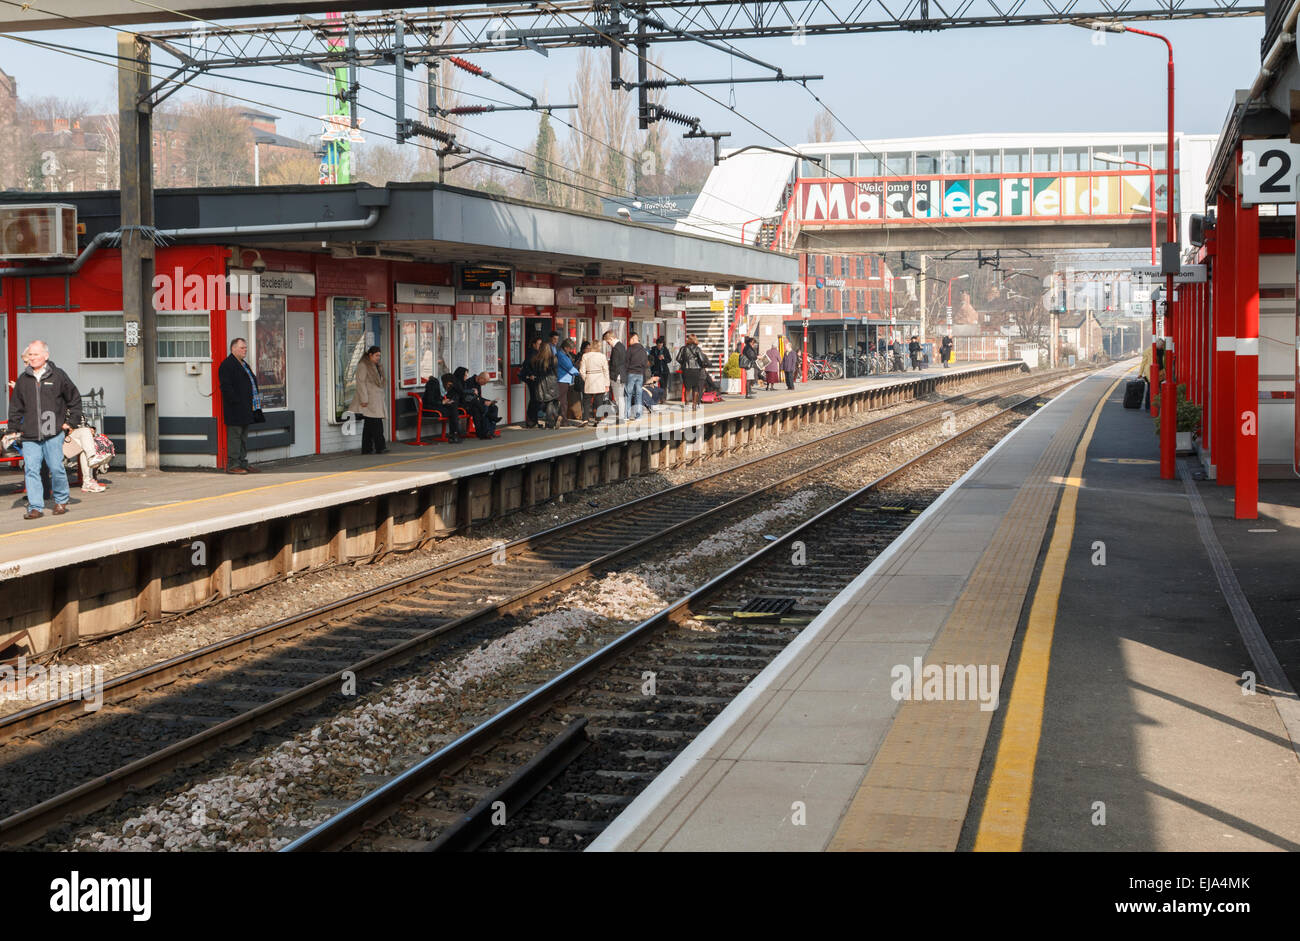 Macclesfield Railway station platforms on a sunny spring day. Stock Photo